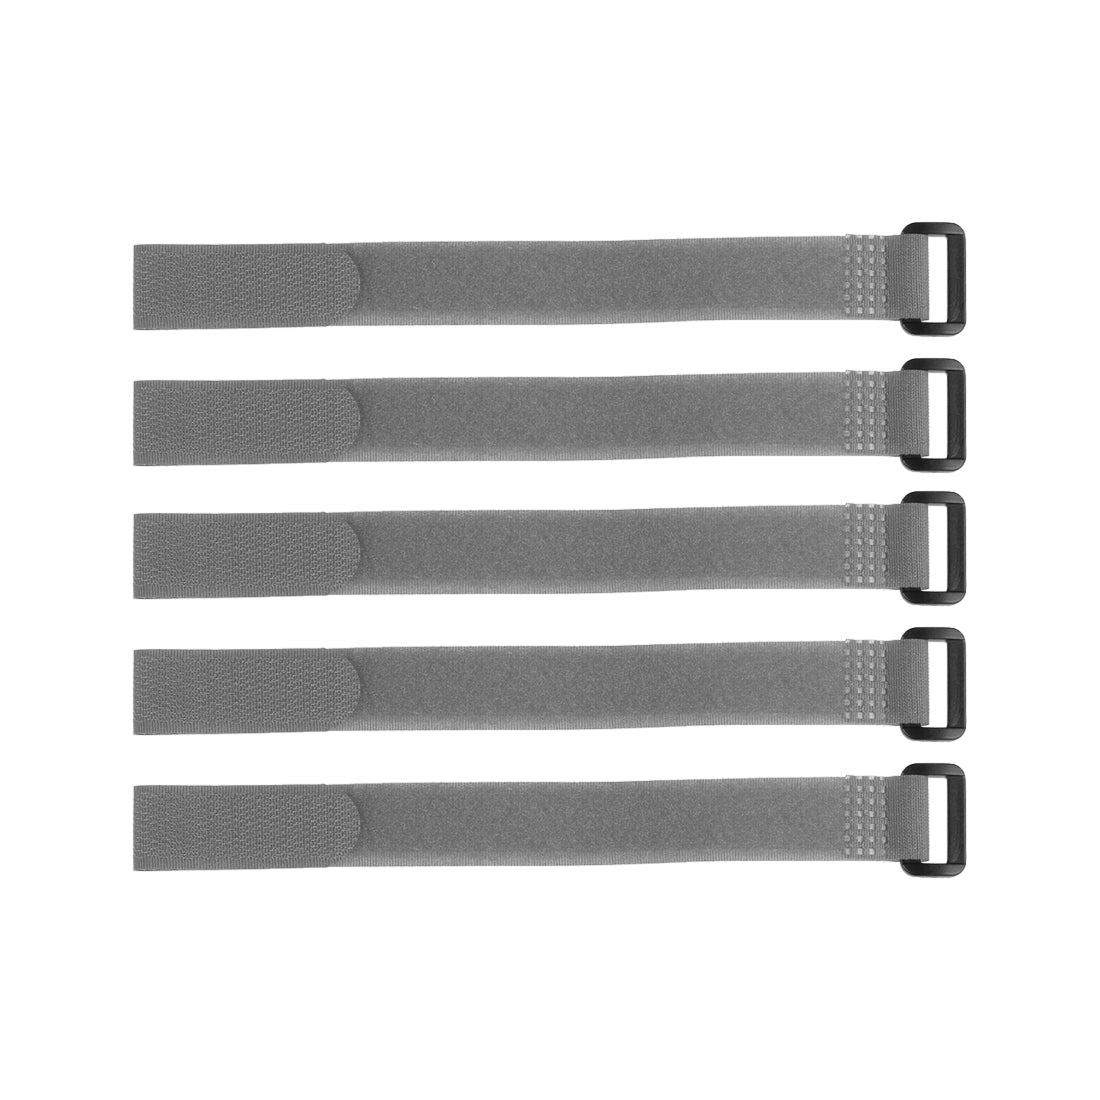 uxcell Uxcell 5pcs Hook and Loop Straps 3/4-inch x 10-inch Securing Straps Cable Tie (Gray)